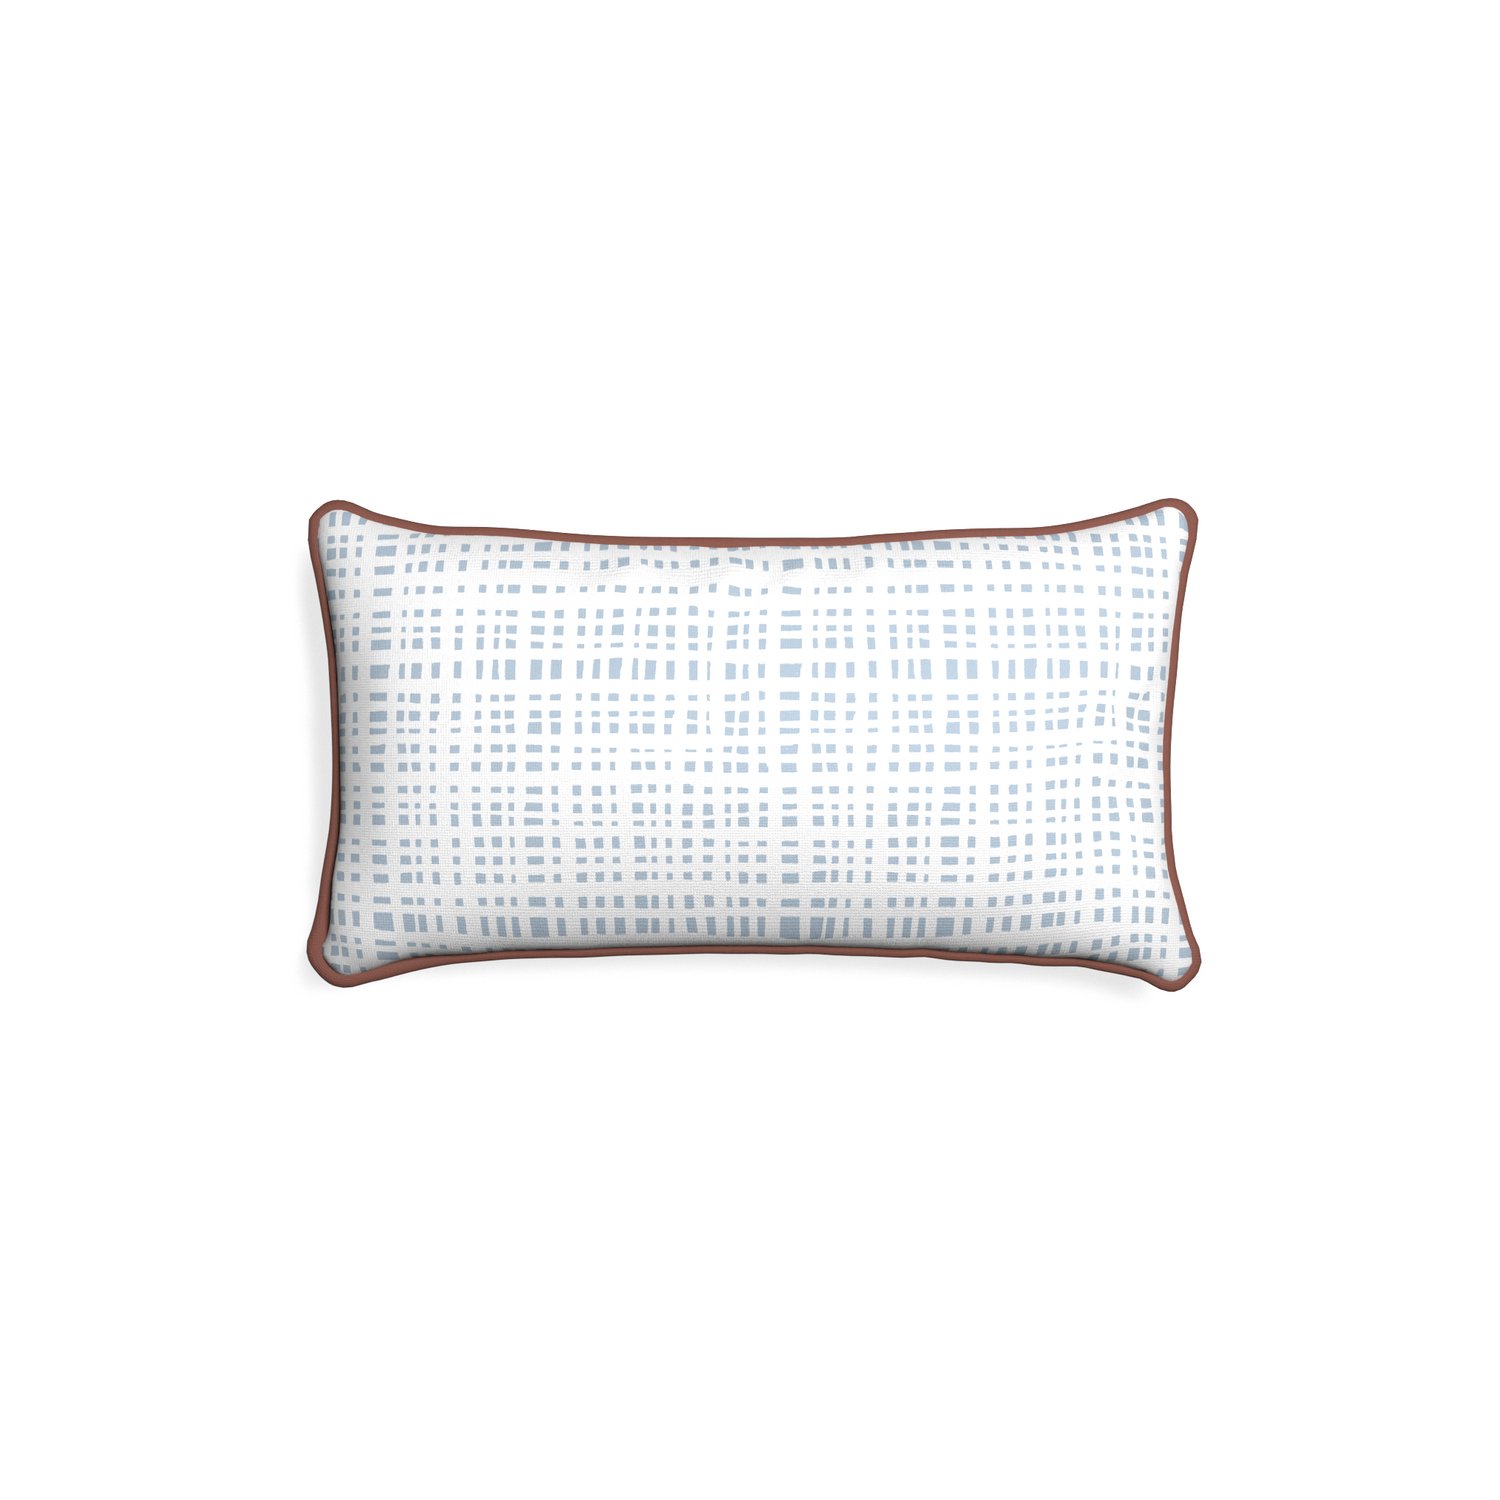 Petite-lumbar ginger custom plaid sky bluepillow with w piping on white background